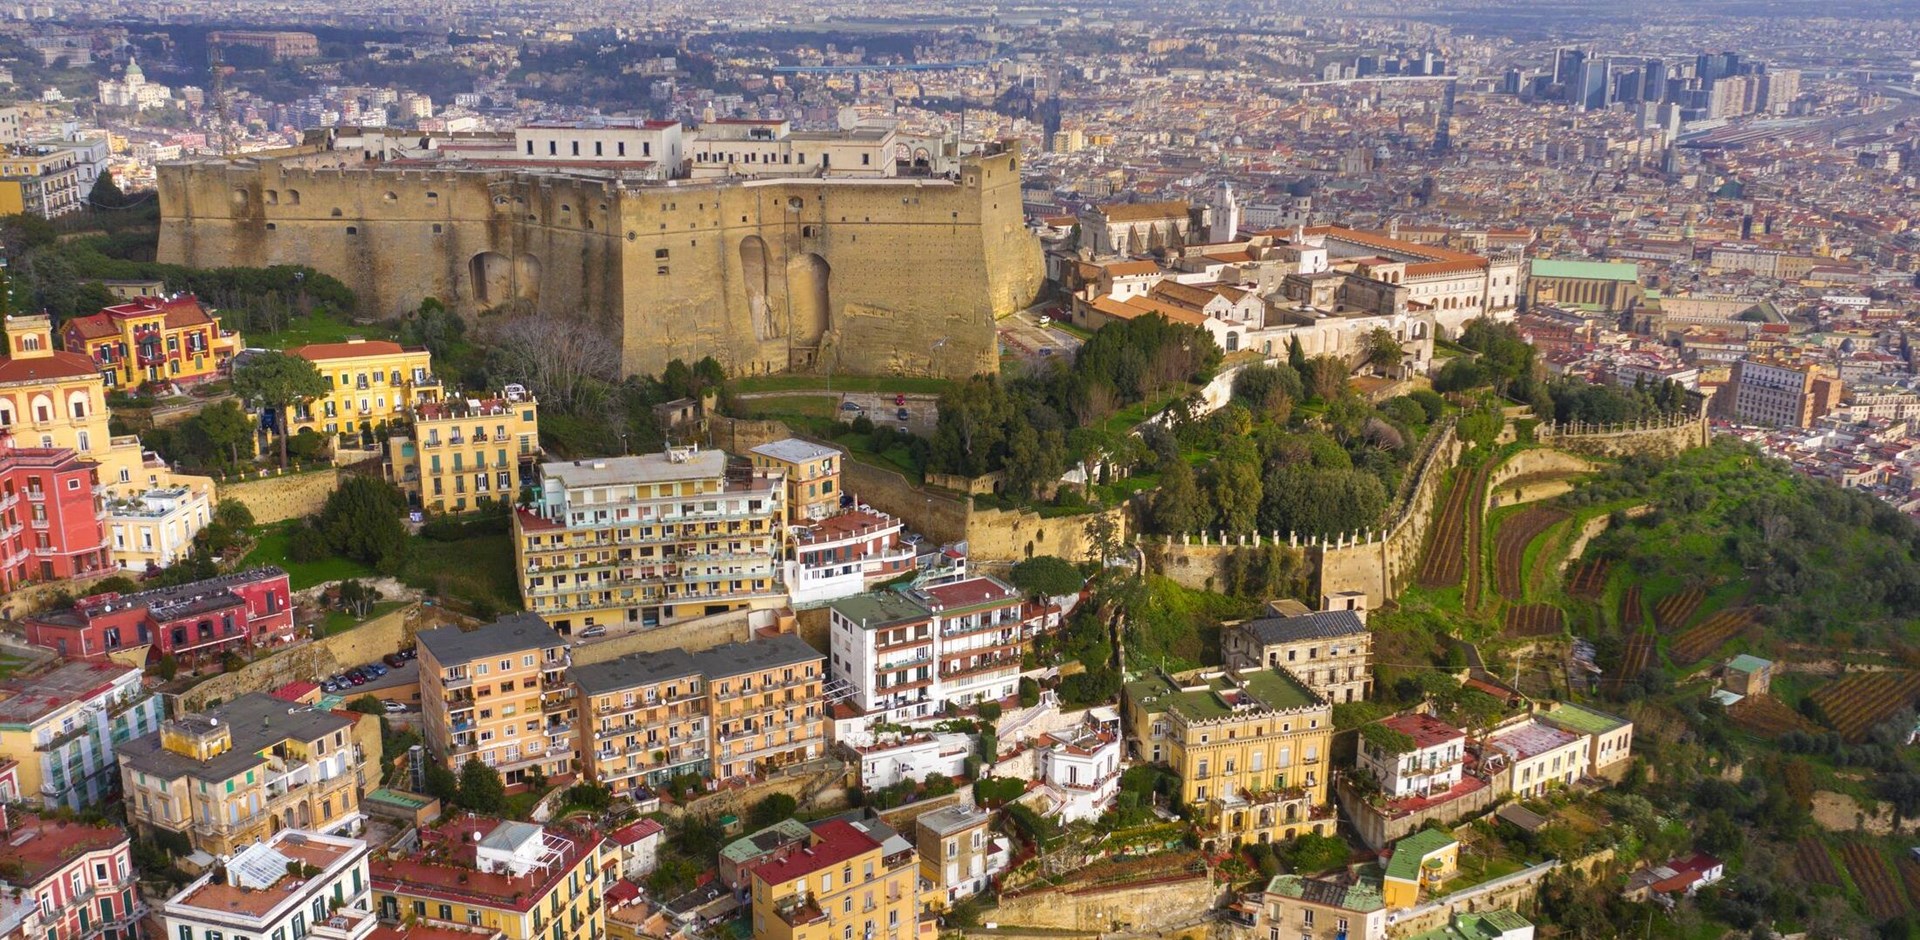 Aerial view of Castel Sant'elmo in Naples, Italy. The Castle is located in the Vomero district and overlooks the town. In background the downtown of  the city.